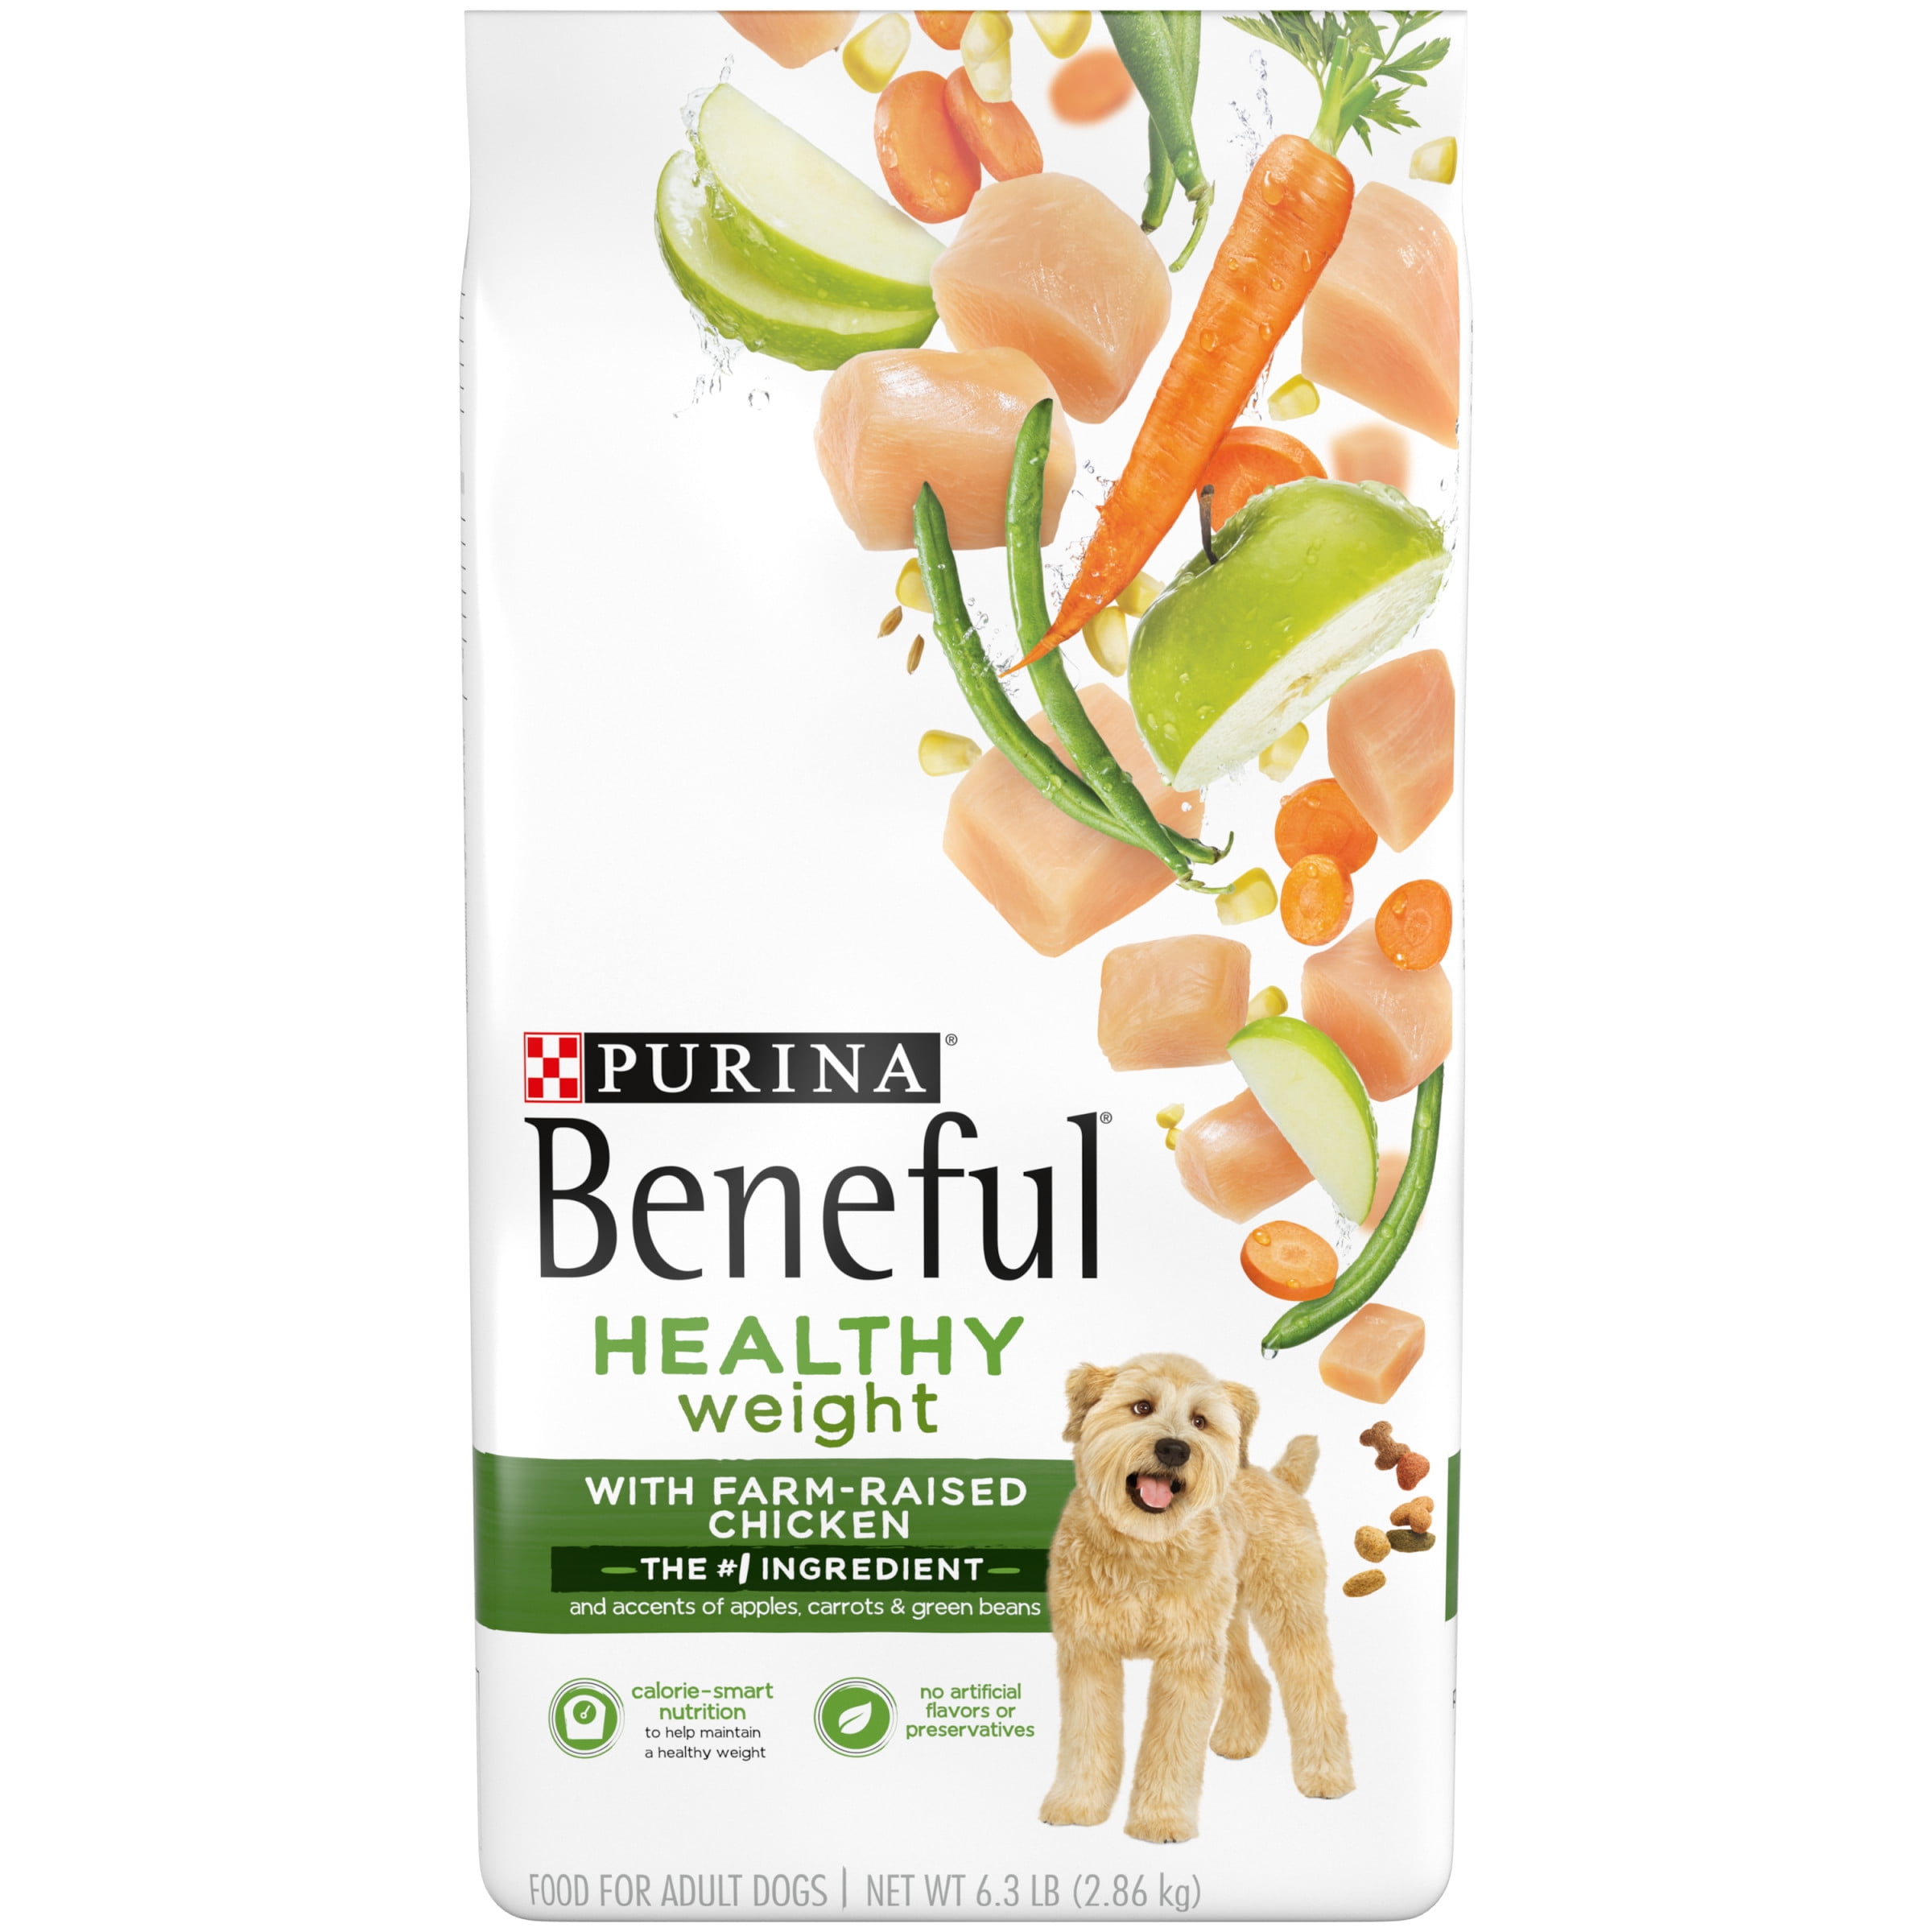 Purina Beneful Healthy Weight Dry Dog